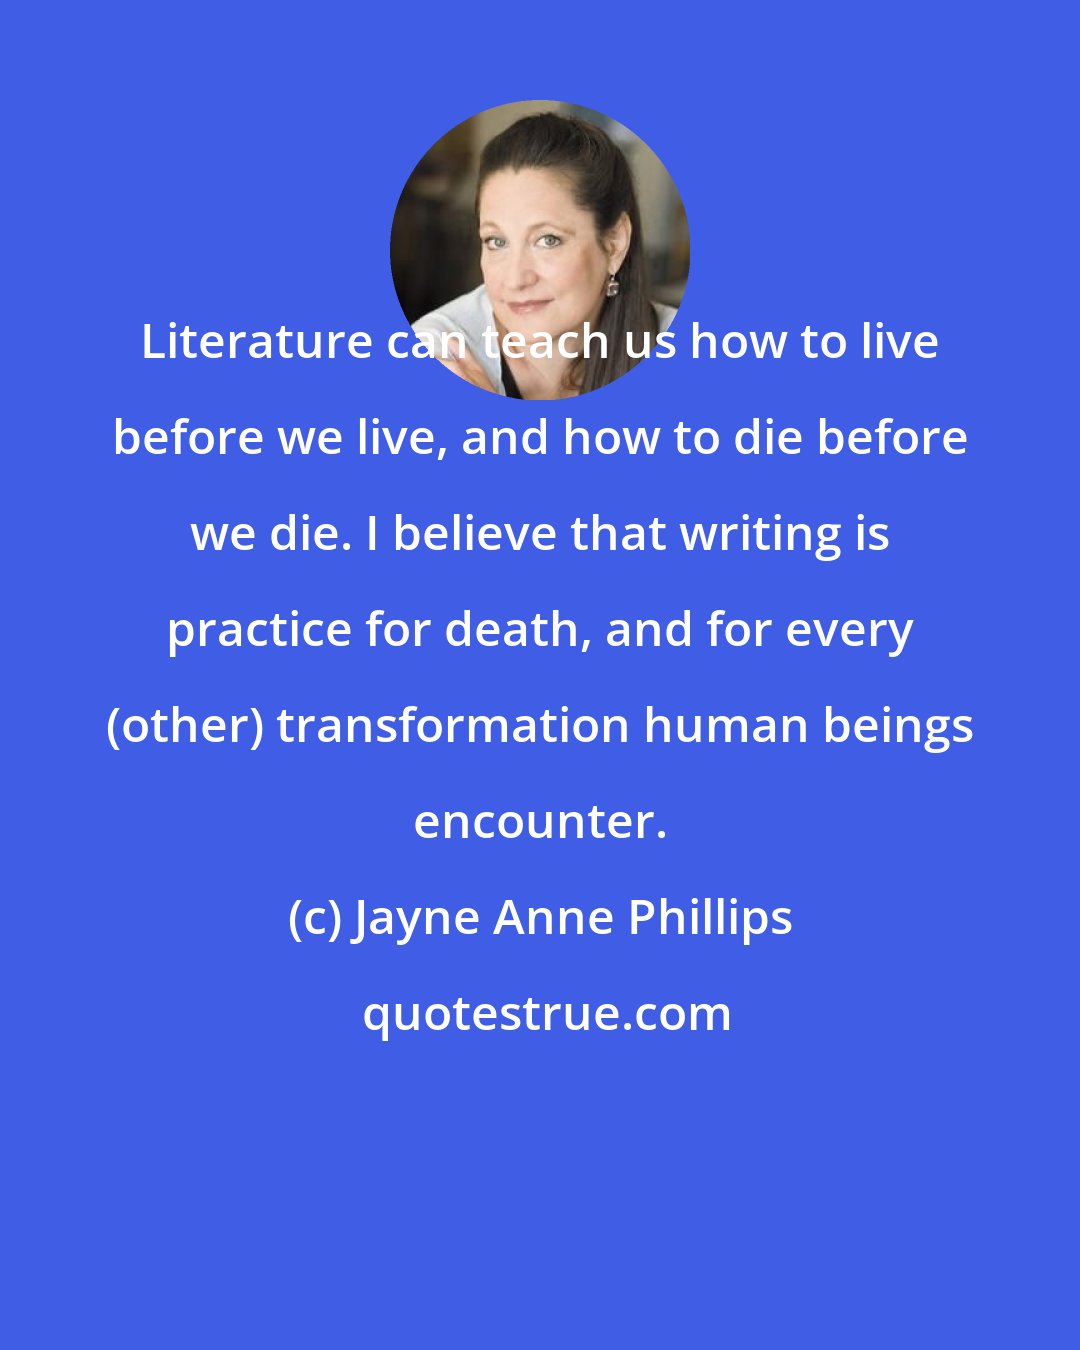 Jayne Anne Phillips: Literature can teach us how to live before we live, and how to die before we die. I believe that writing is practice for death, and for every (other) transformation human beings encounter.